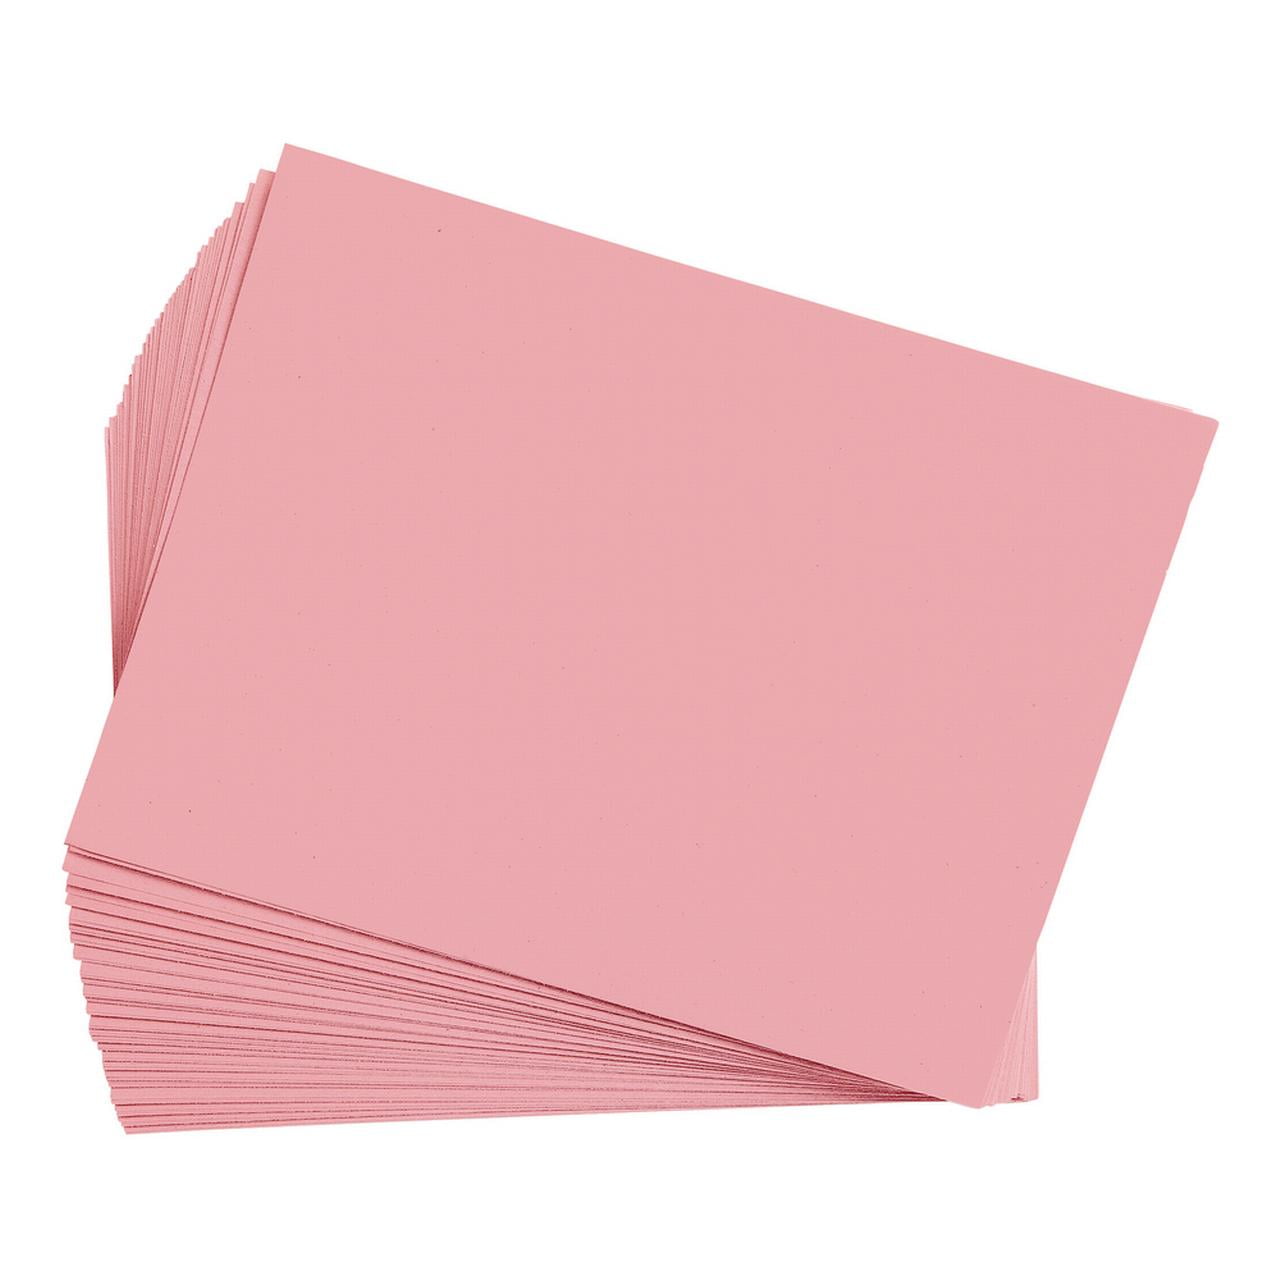  Construction Paper,Hot Pink,9 inches x 12 inches,500 Sheets,  Heavyweight Construction Paper,Crafts,Art,Kids Art,Painting,  Coloring,Drawing,Creating,Paper,Art Project,All Purpose : Everything Else